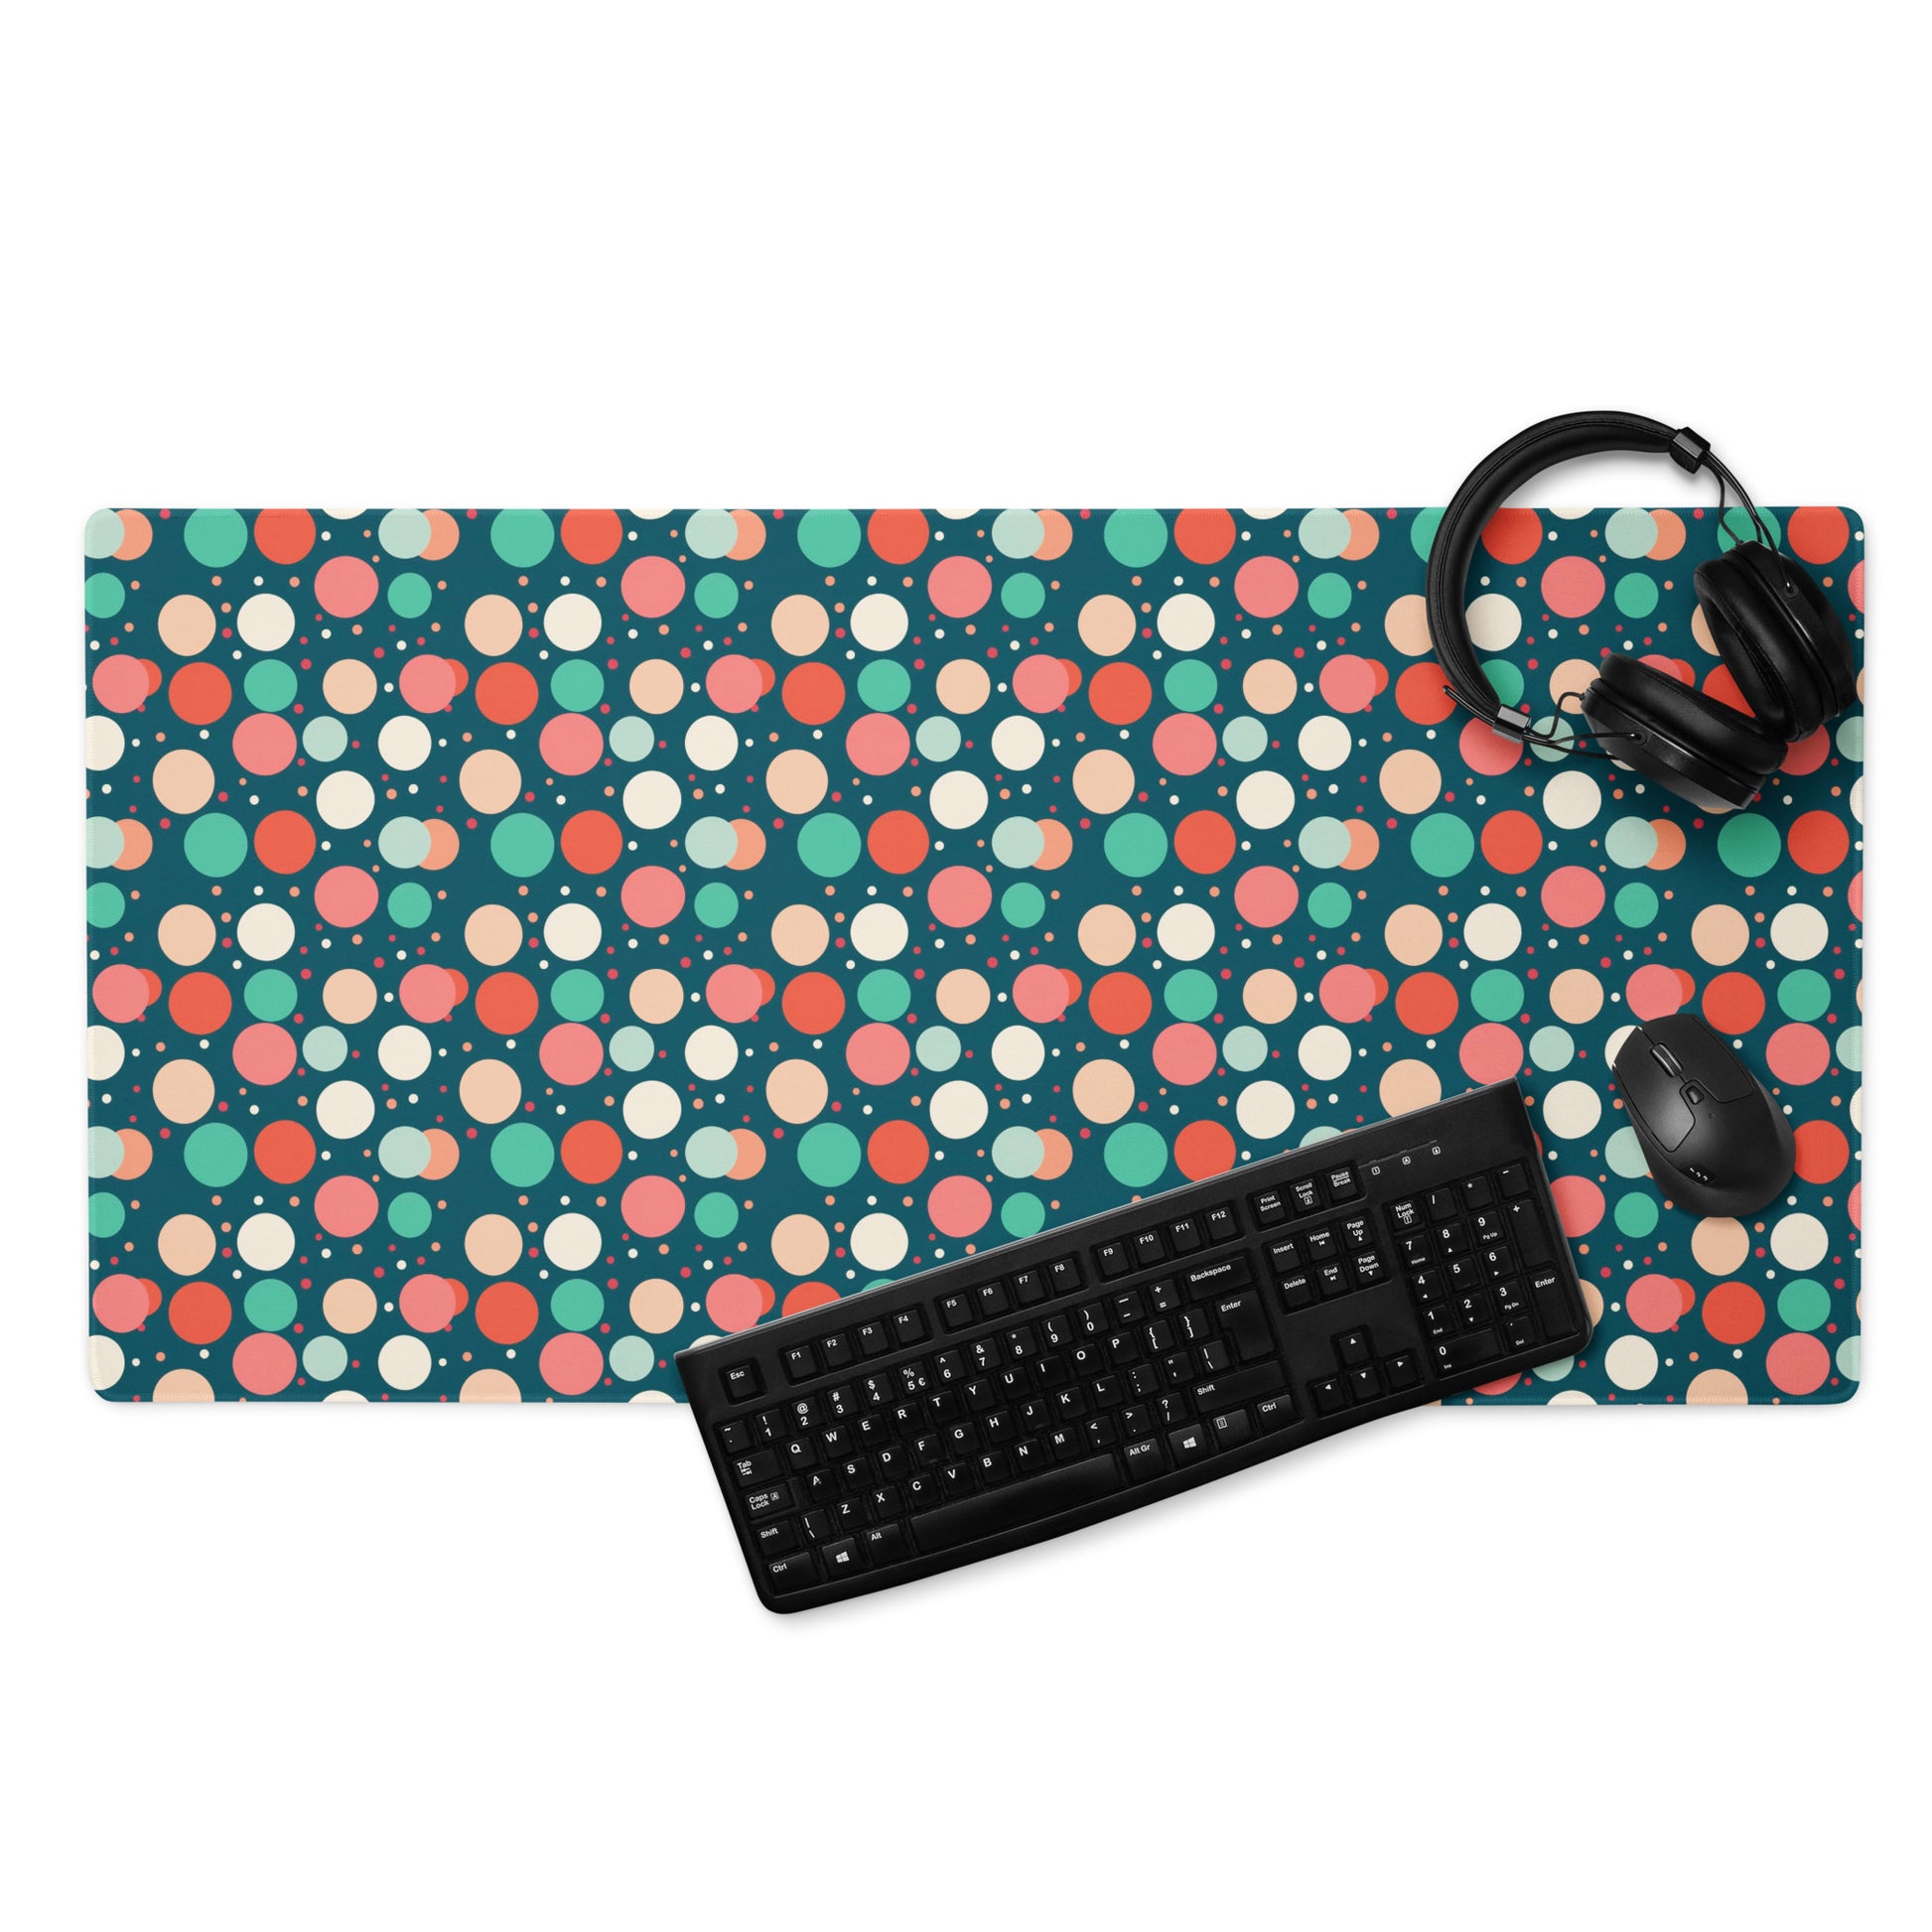  A 36" x 18" desk pad with red teal and yellow polka dot pattern. With a keyboard, mouse, and headphones sitting on it.